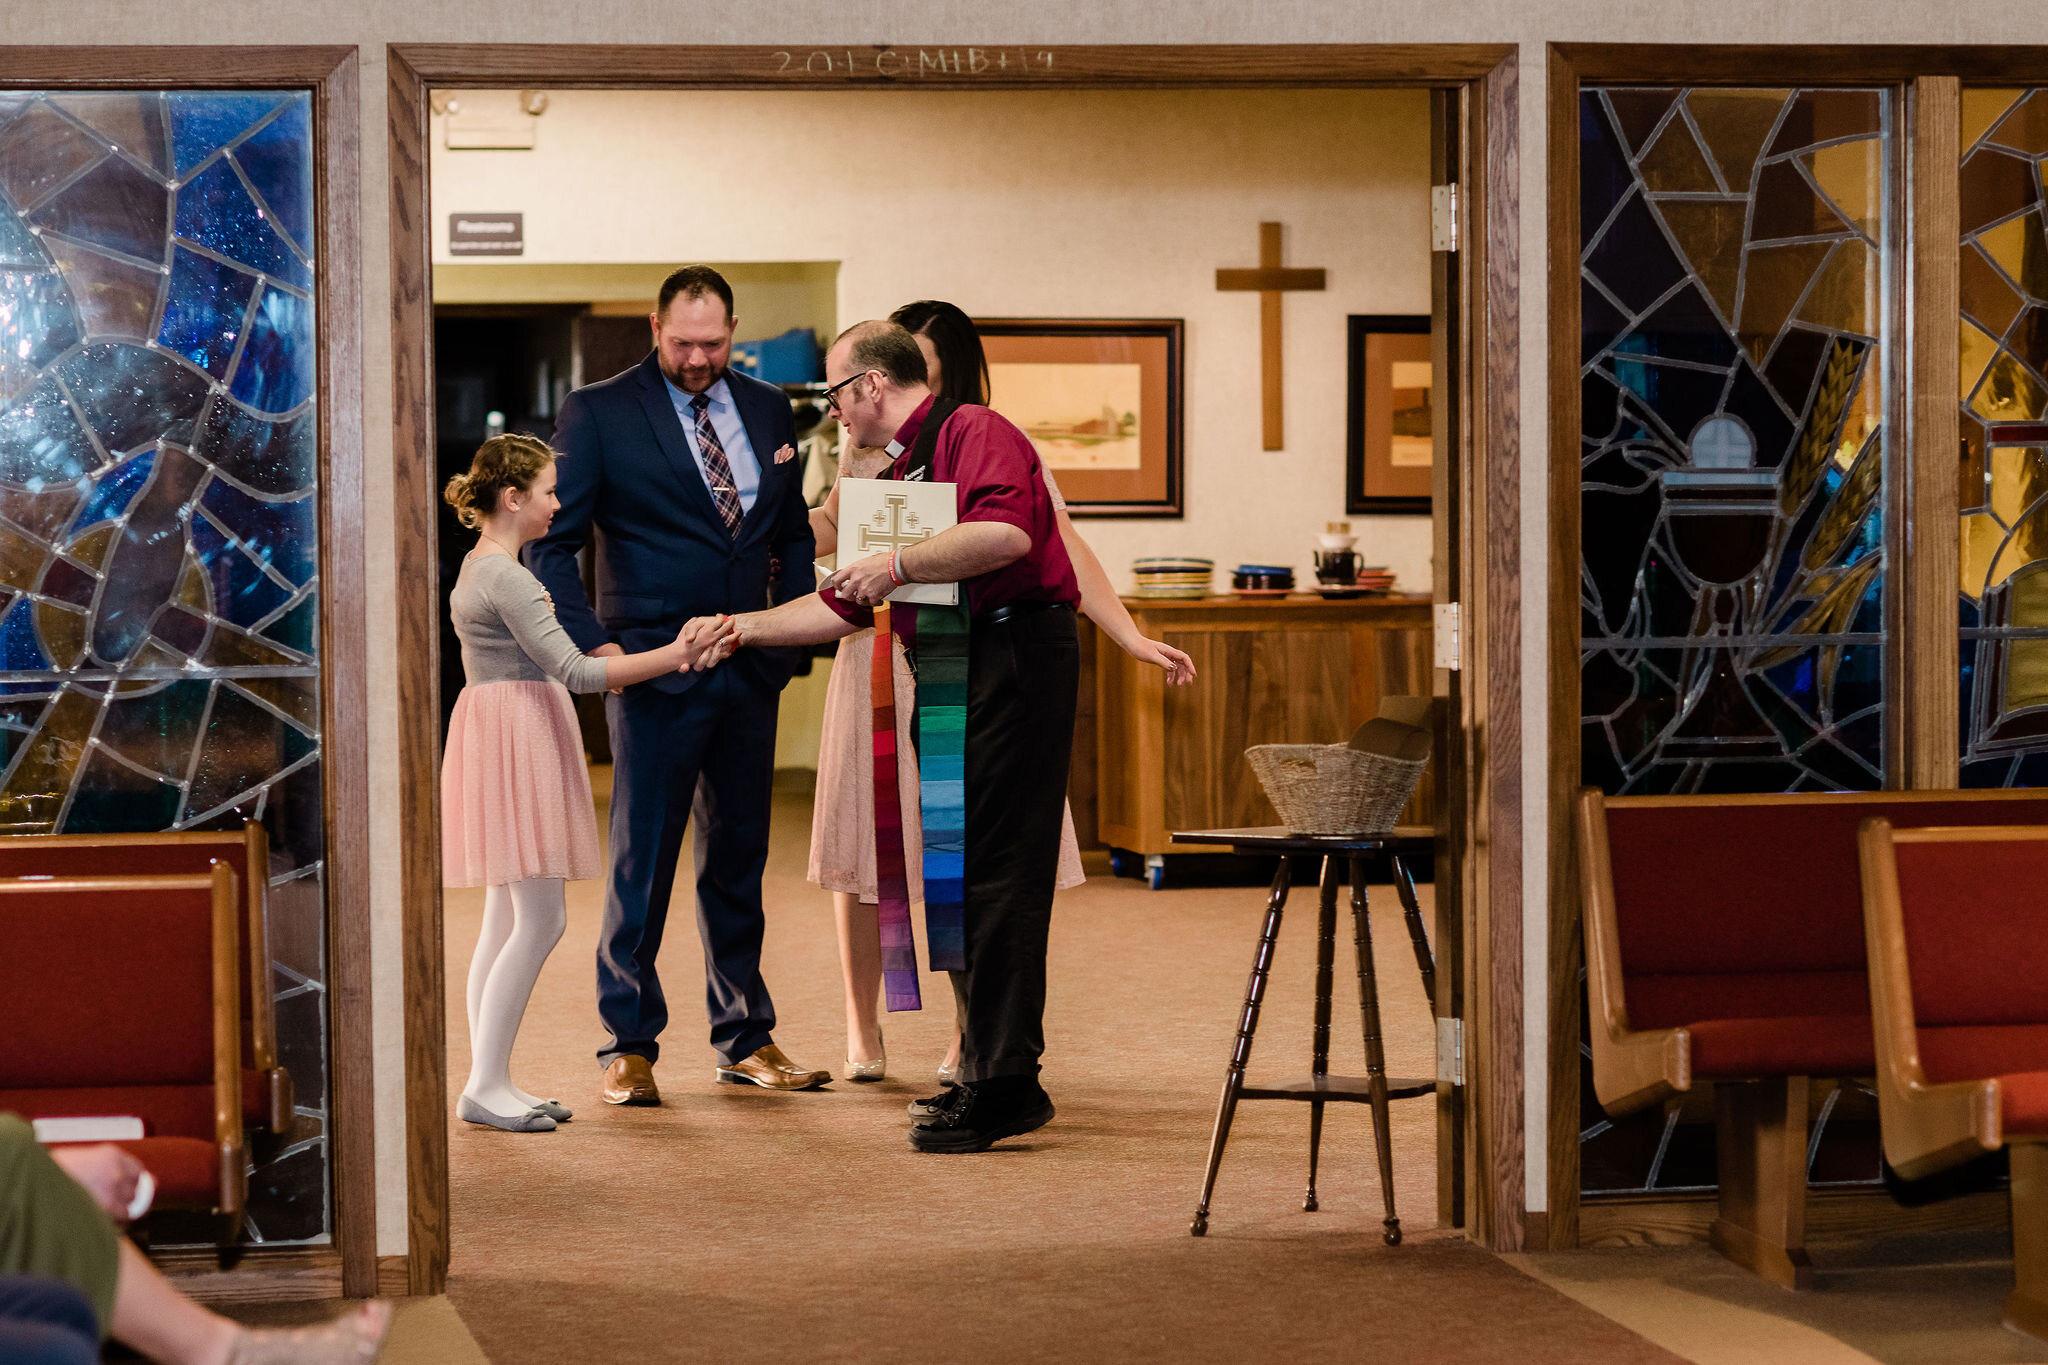 Pastor shaking hands with groom's child